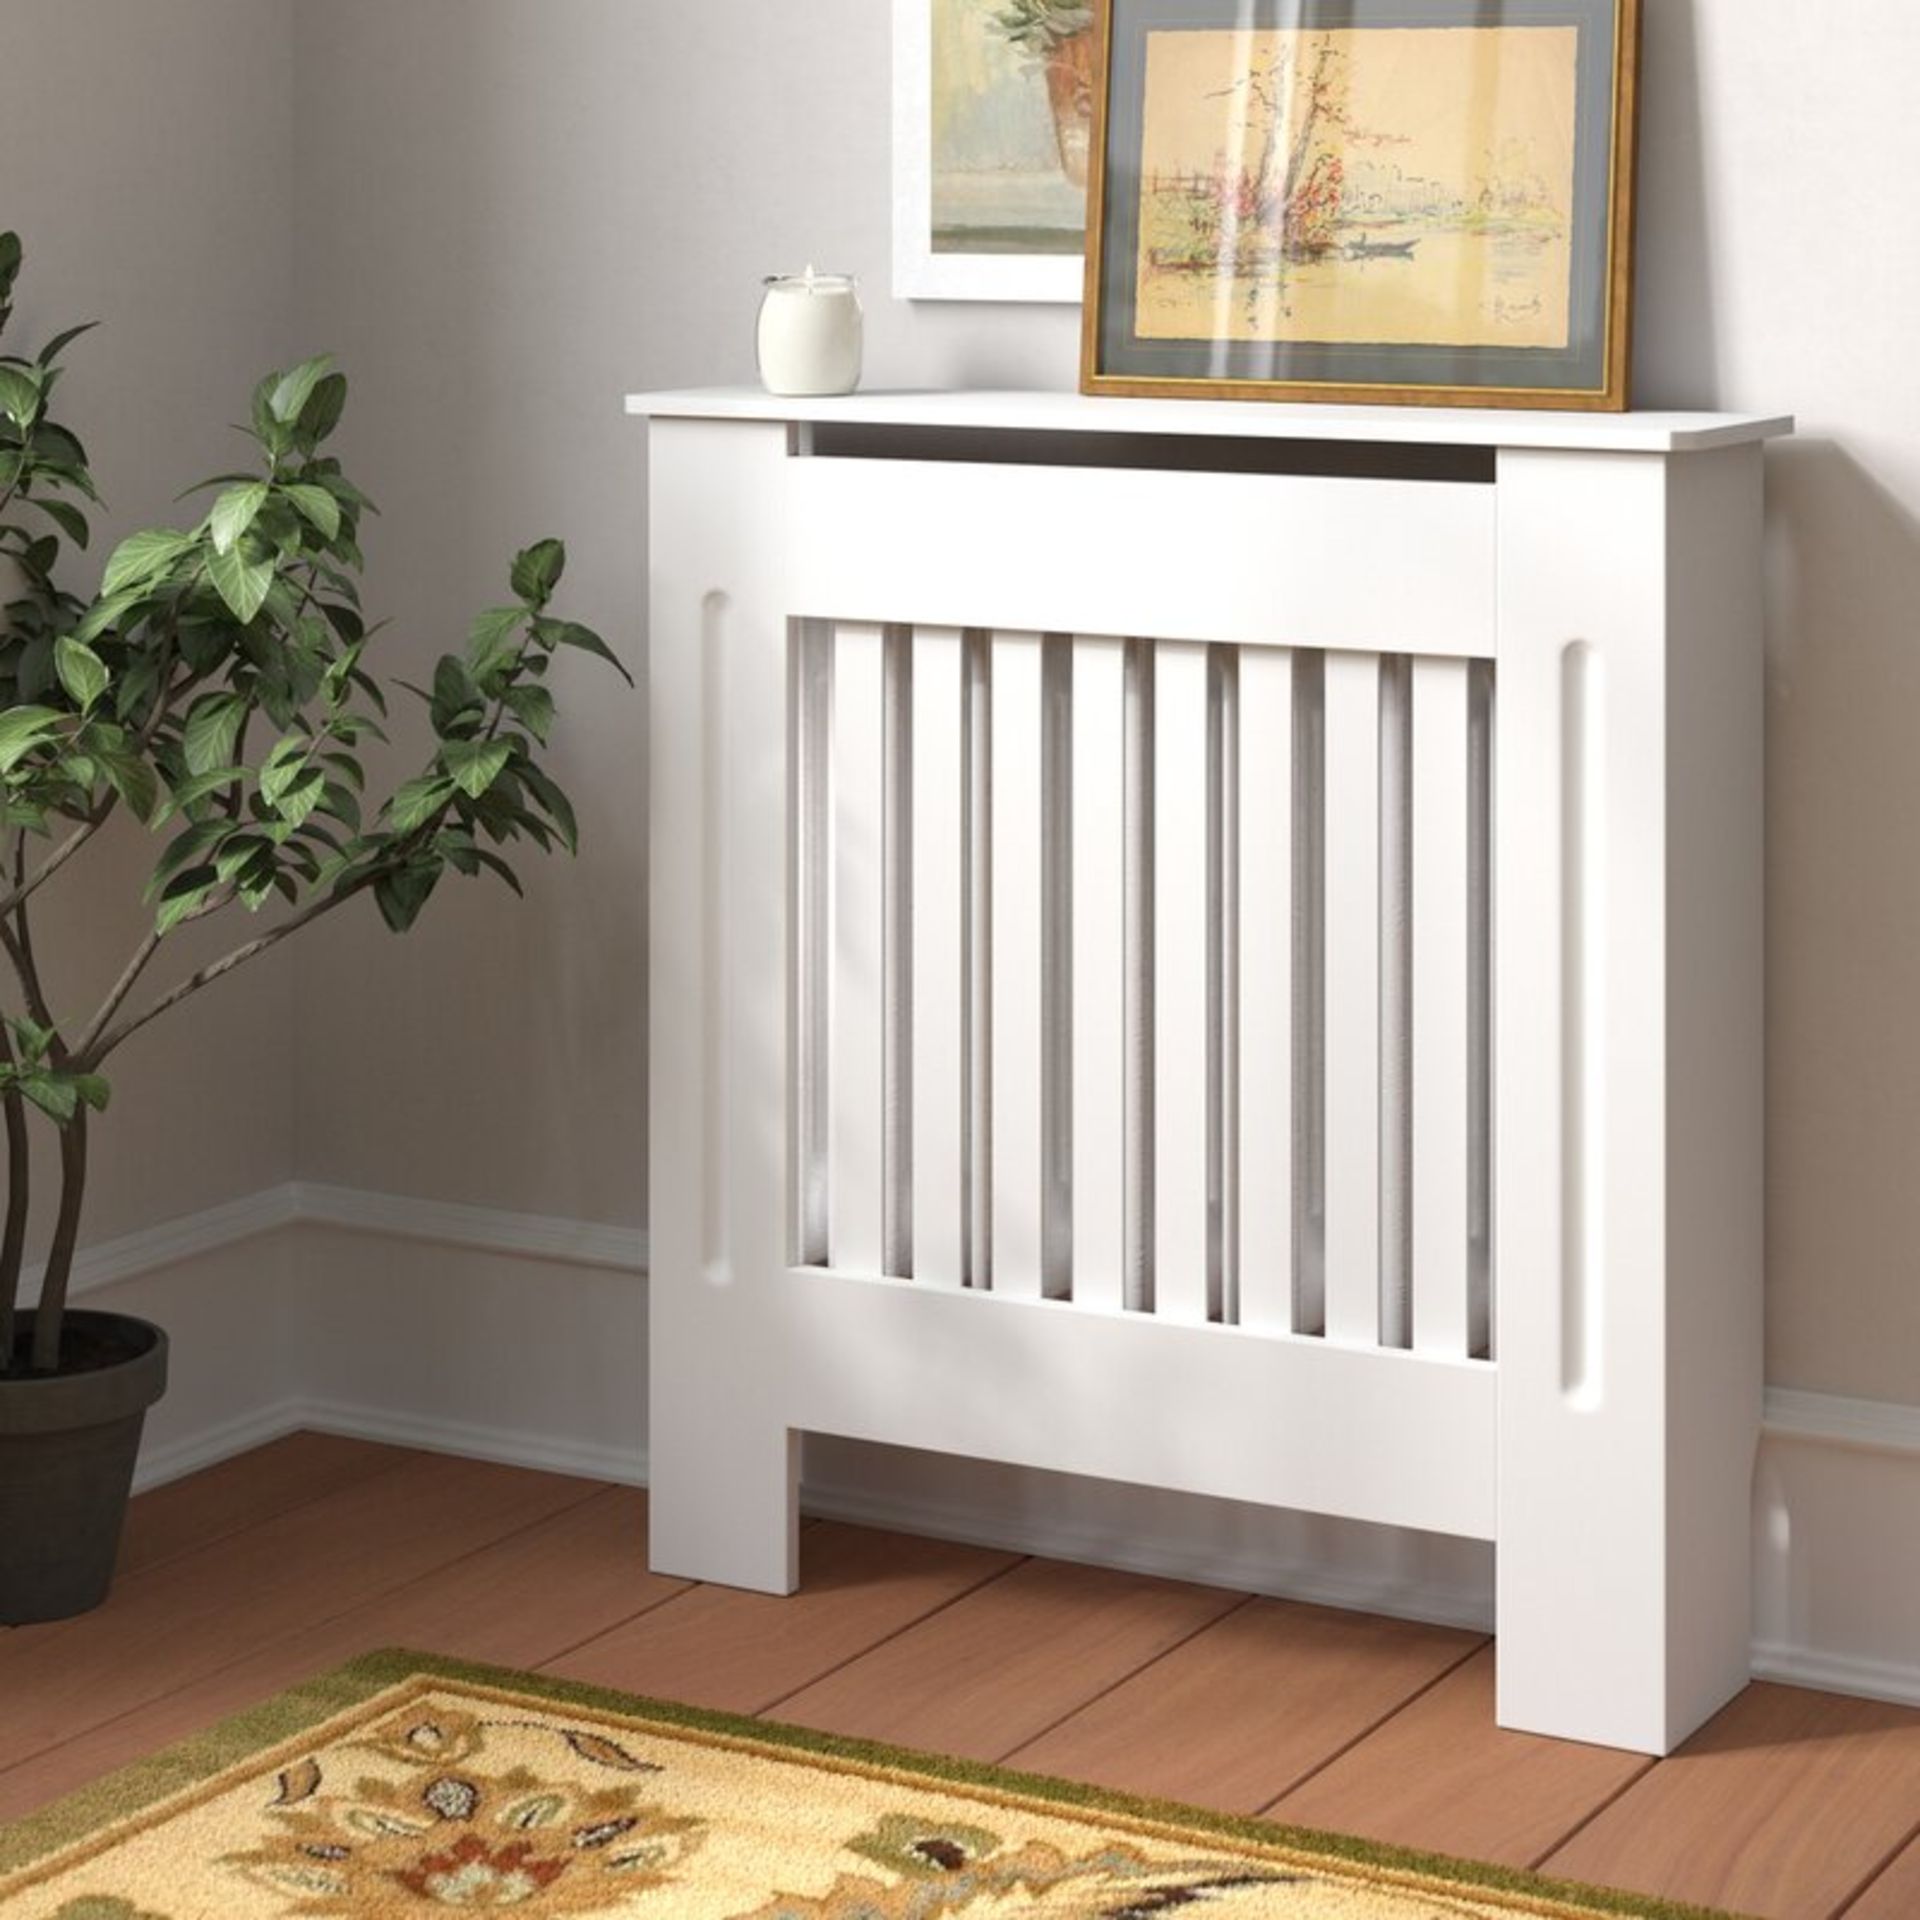 BOXED MEGAN RADIATOR COVER SIZE SMALL IN WHITECondition ReportAppraisal Available on Request- All